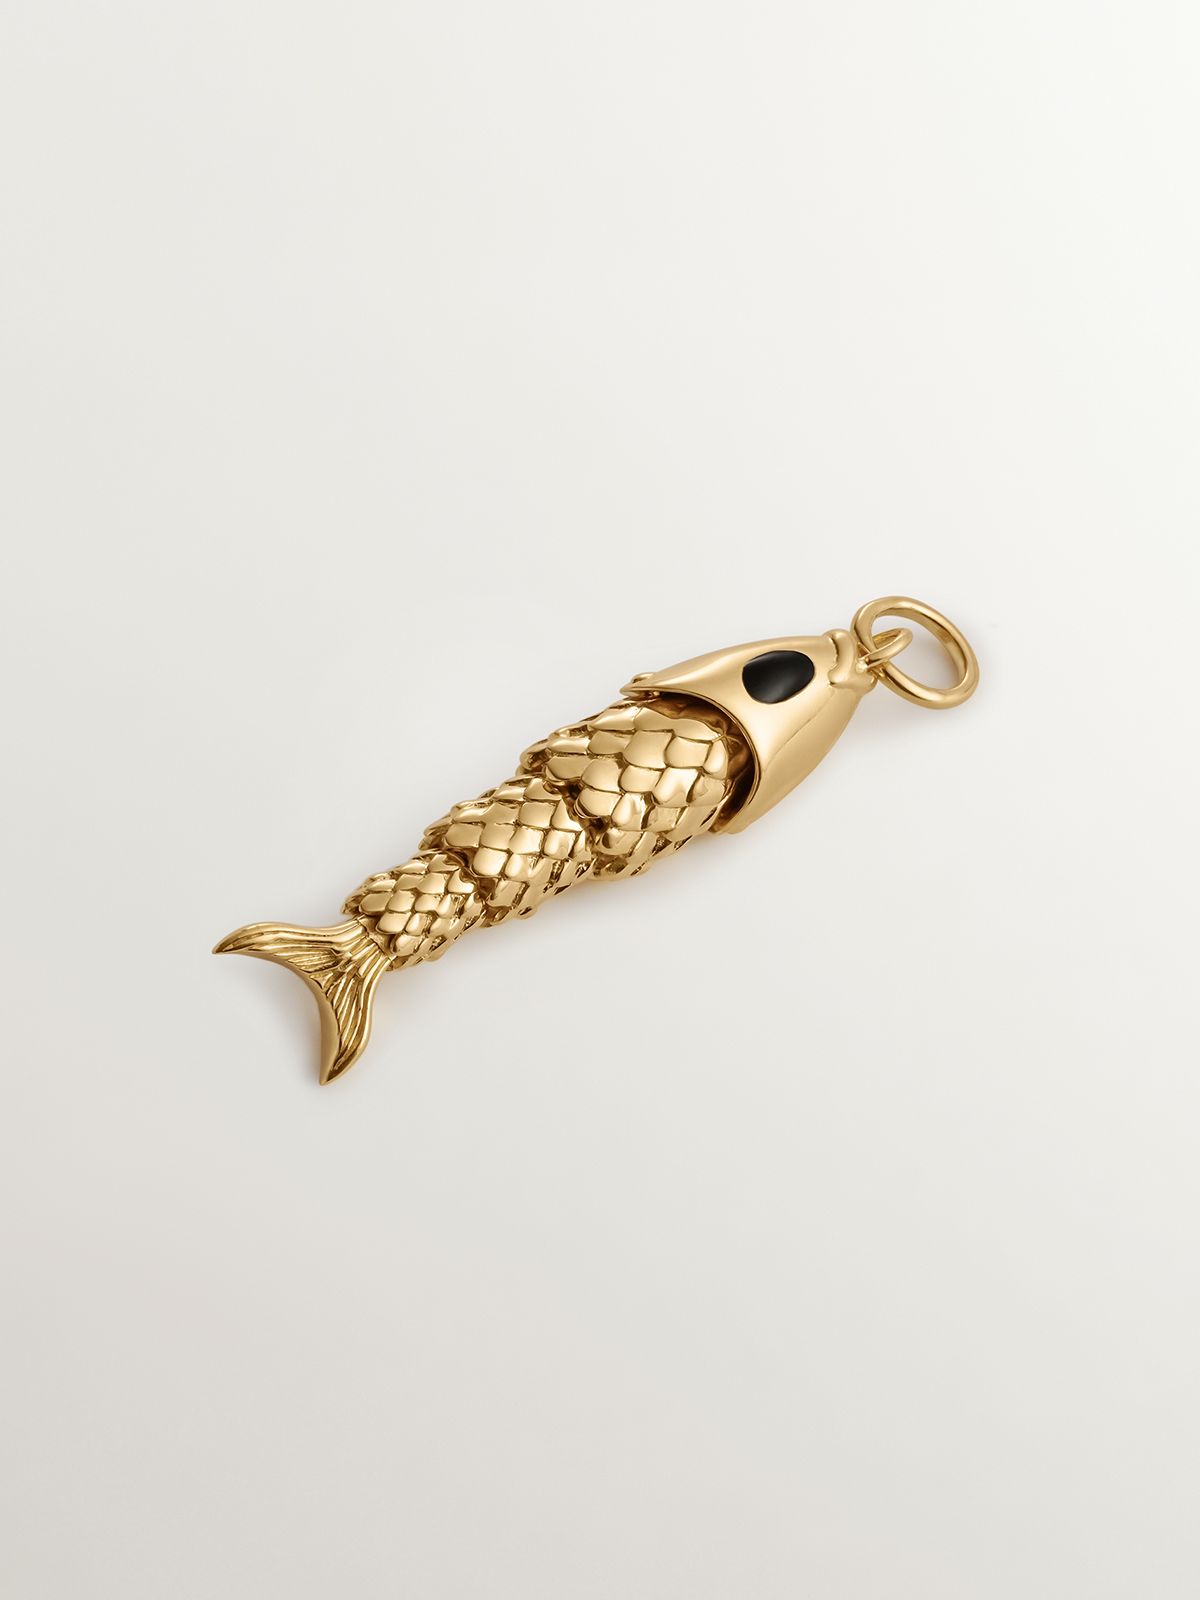 925 Silver charm bathed in 18K yellow gold with black enamel and fish shape.